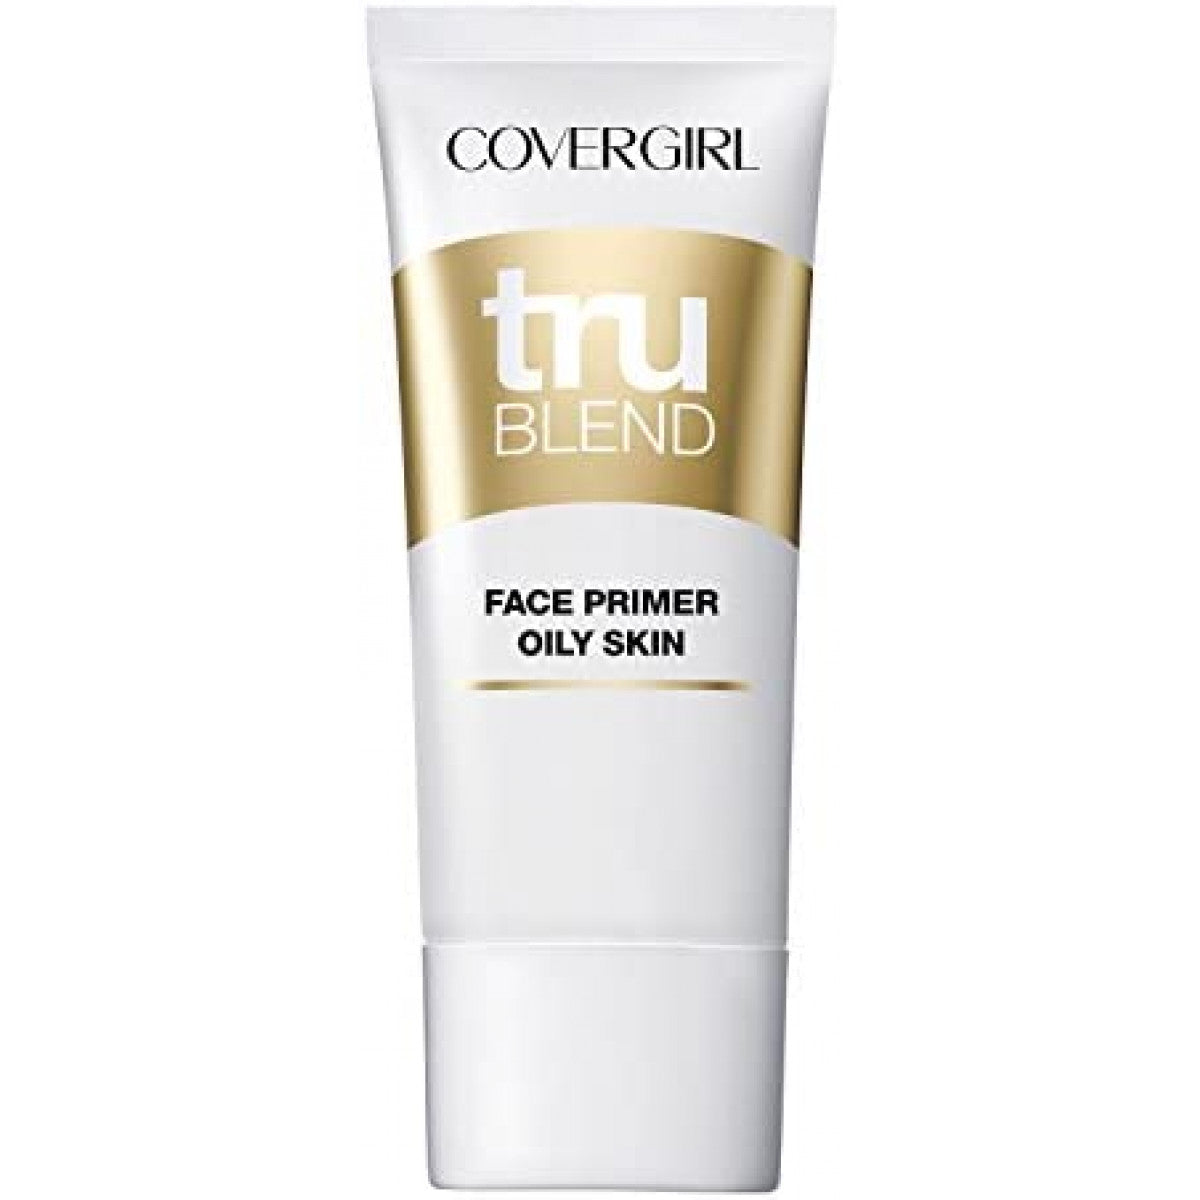 CoverGirl Makeup Setters and Primers for Oily Skin - 1 oz, Light Clear